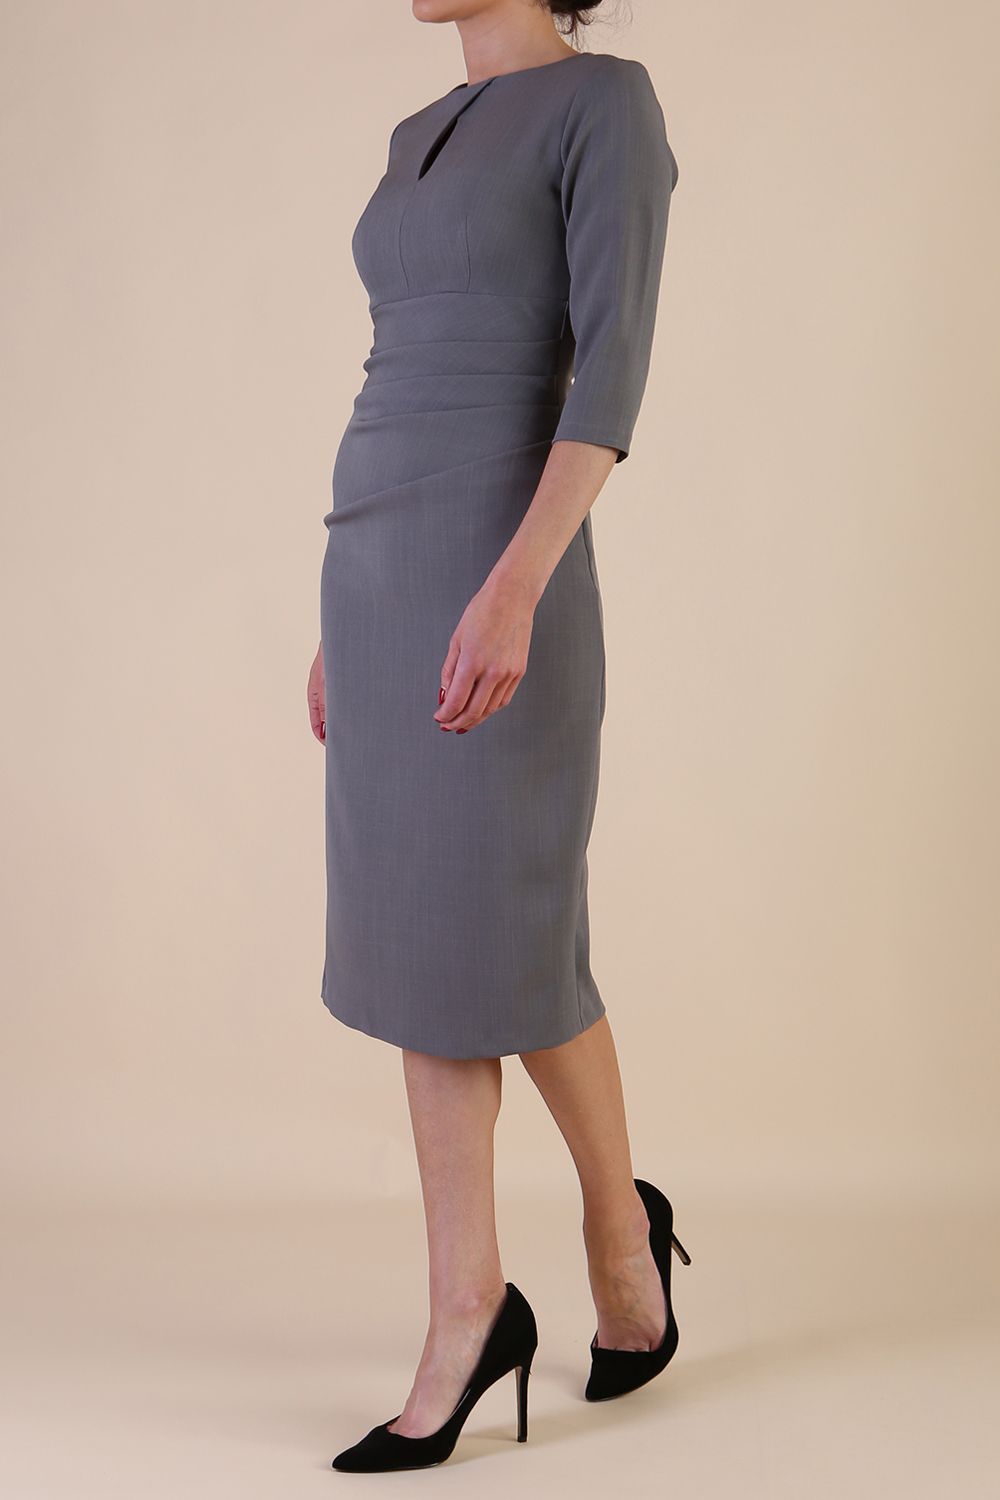 model is wearing the Diva Catwalk Ubrique pencil dress with Long sleeves and keyhole detail in Castlerock Grey fabric colour